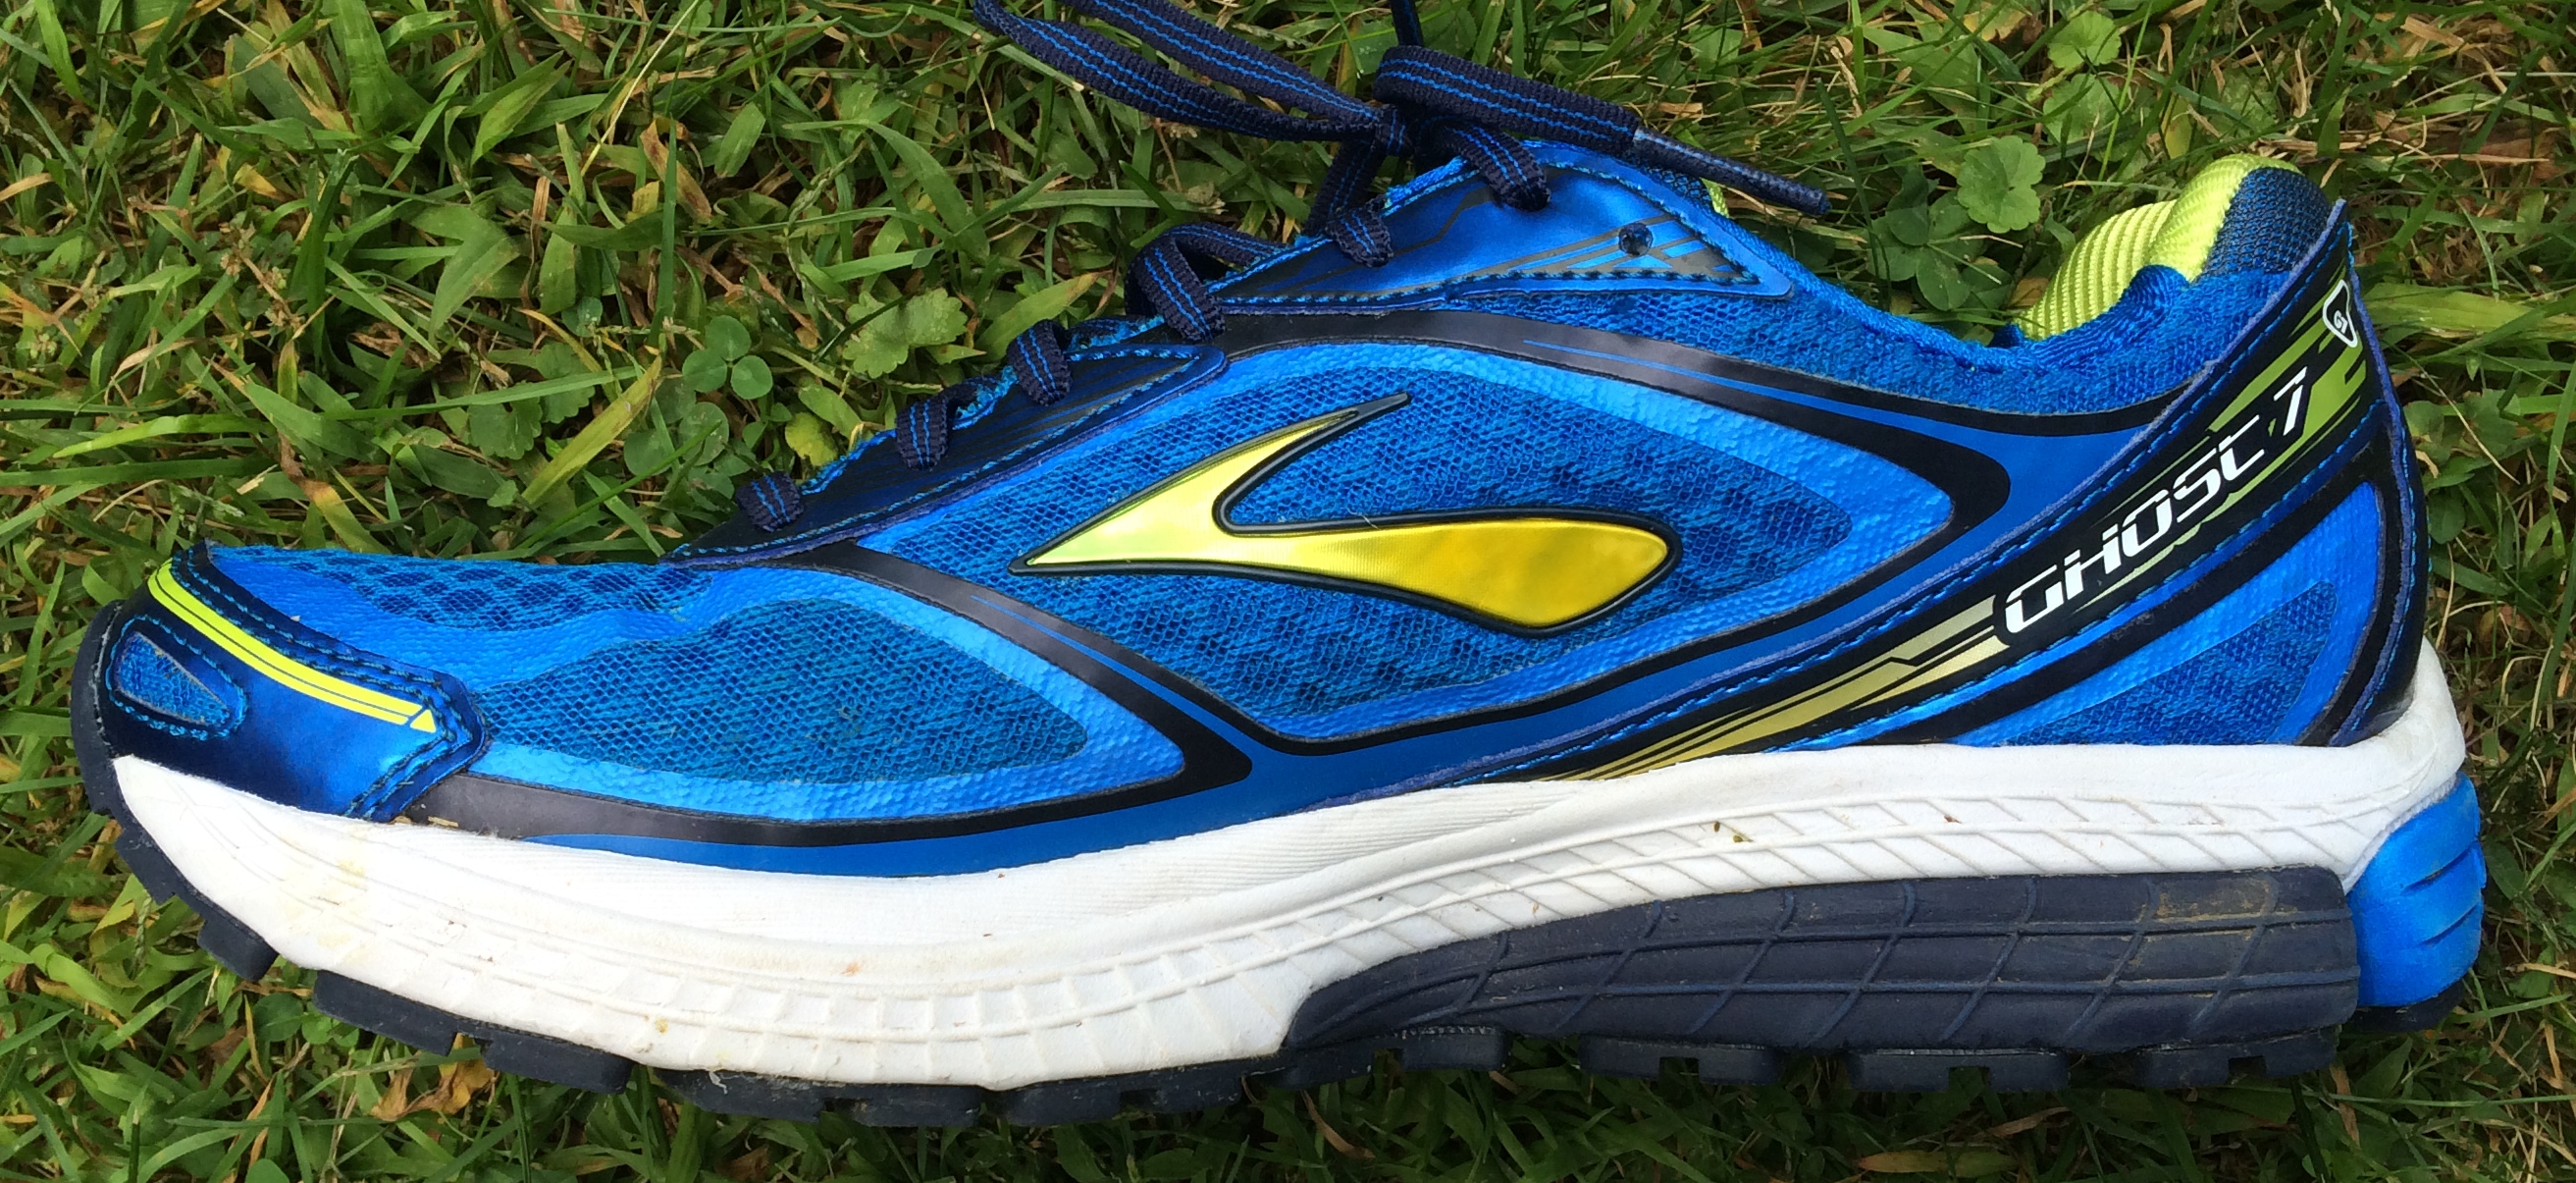 brooks ghost 7 mens for sale